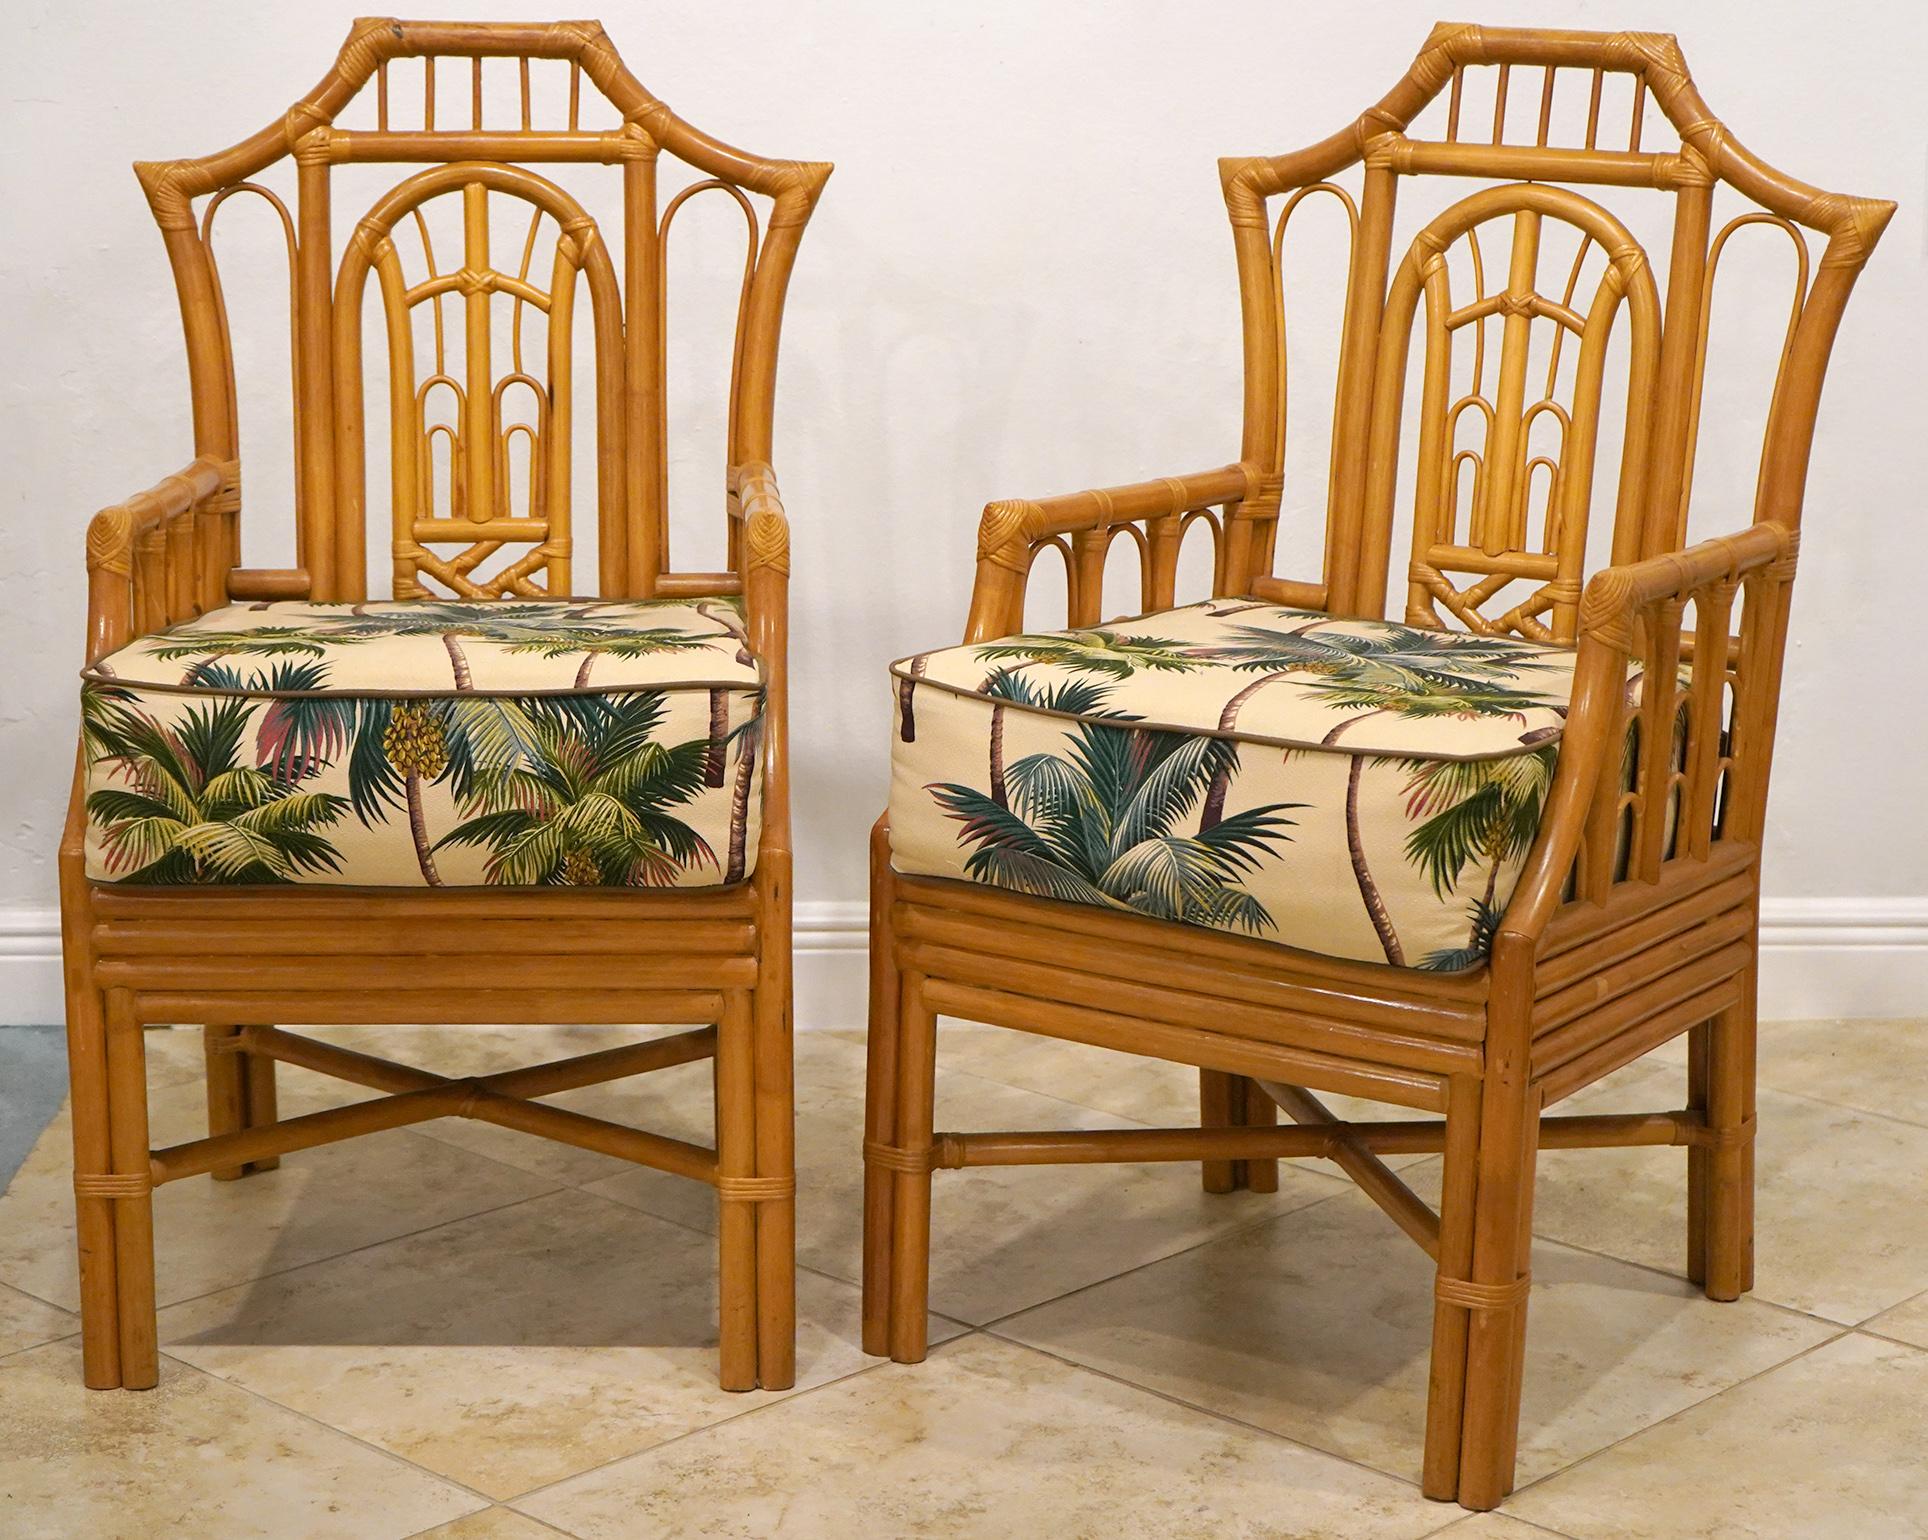 These fabulous and intricately designed Chinoiserie style rattan armchairs feature the pagoda style backrests, seats with cushions and very beautiful joints made in the traditional way.